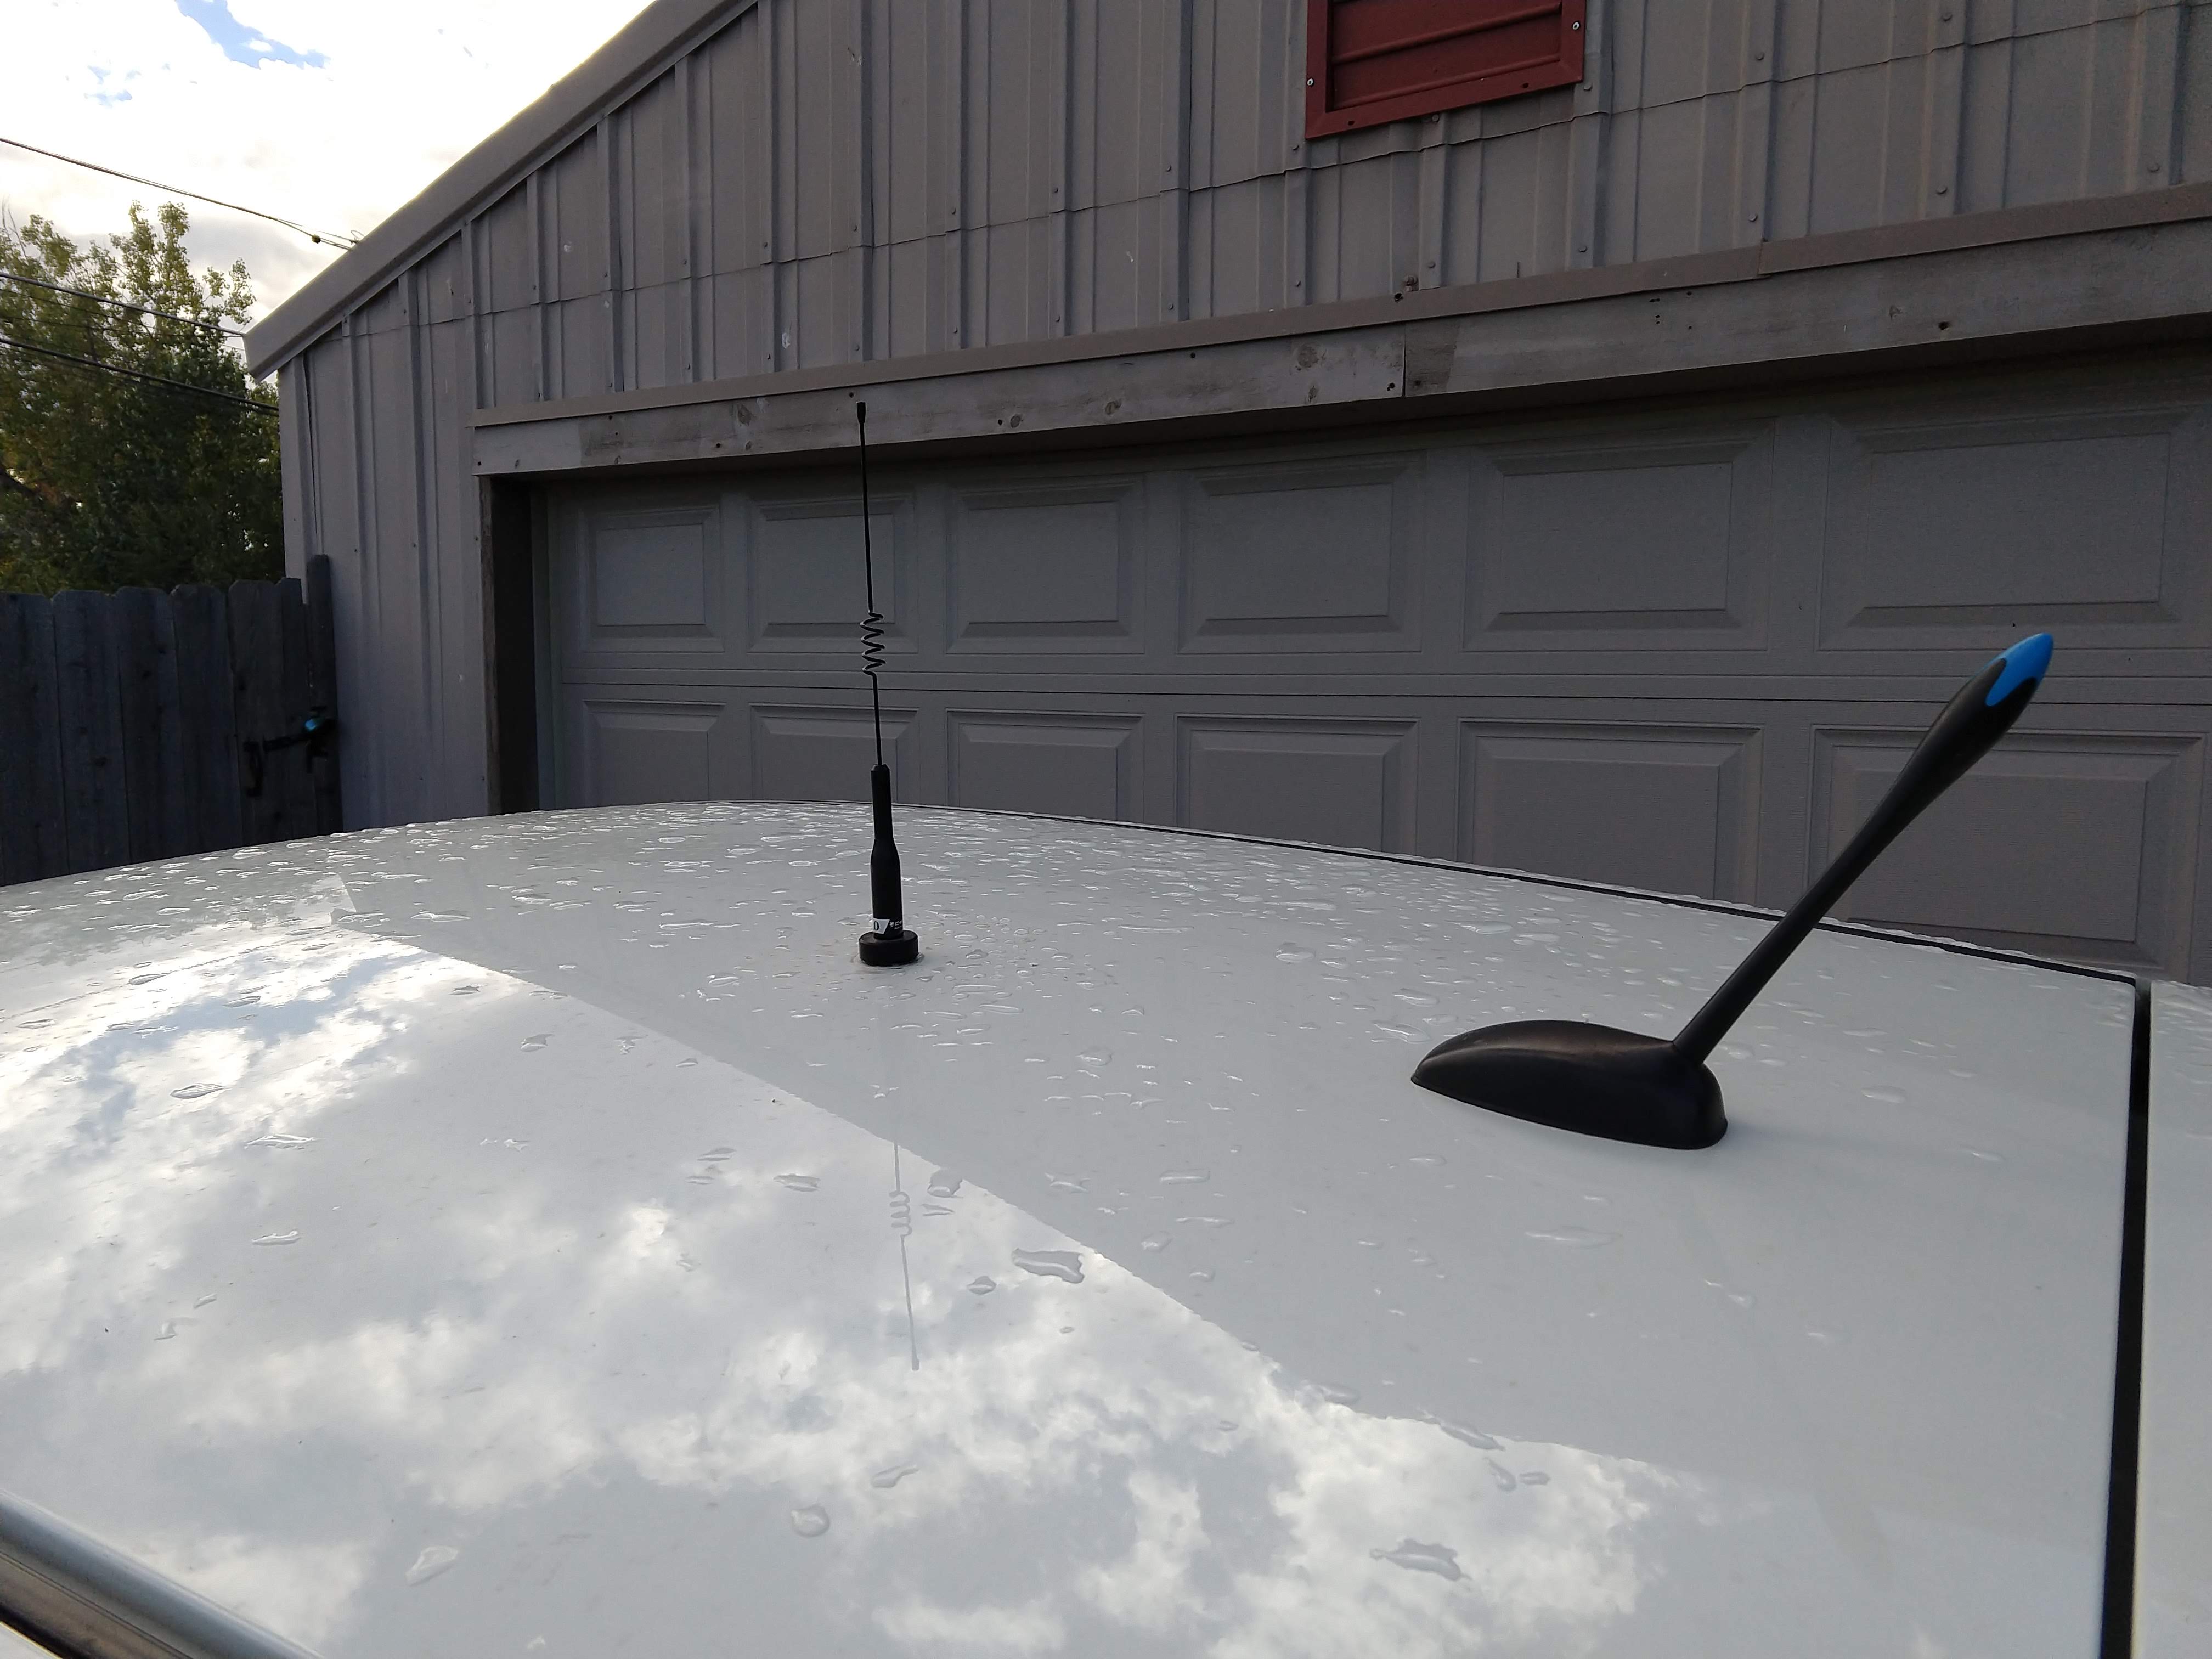 antenna installed on roof of vehicle